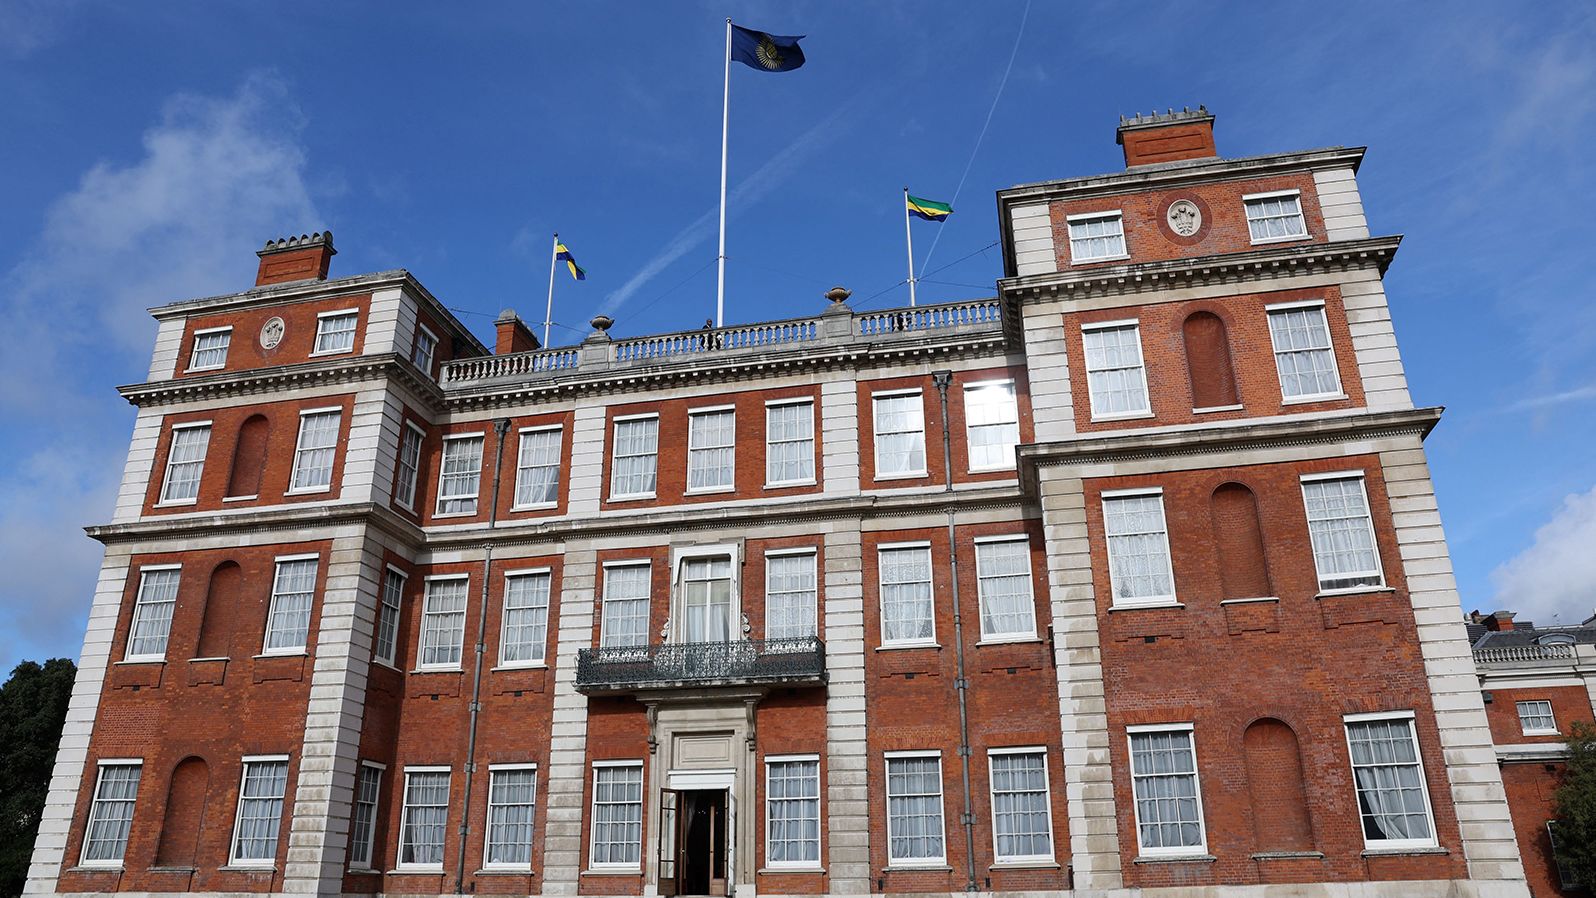 Gabonese flags are raised next to the Commonwealth flag during a ceremony to mark the accession of Gabon to the Commonwealth at the organization's headquarters in London on October 17.